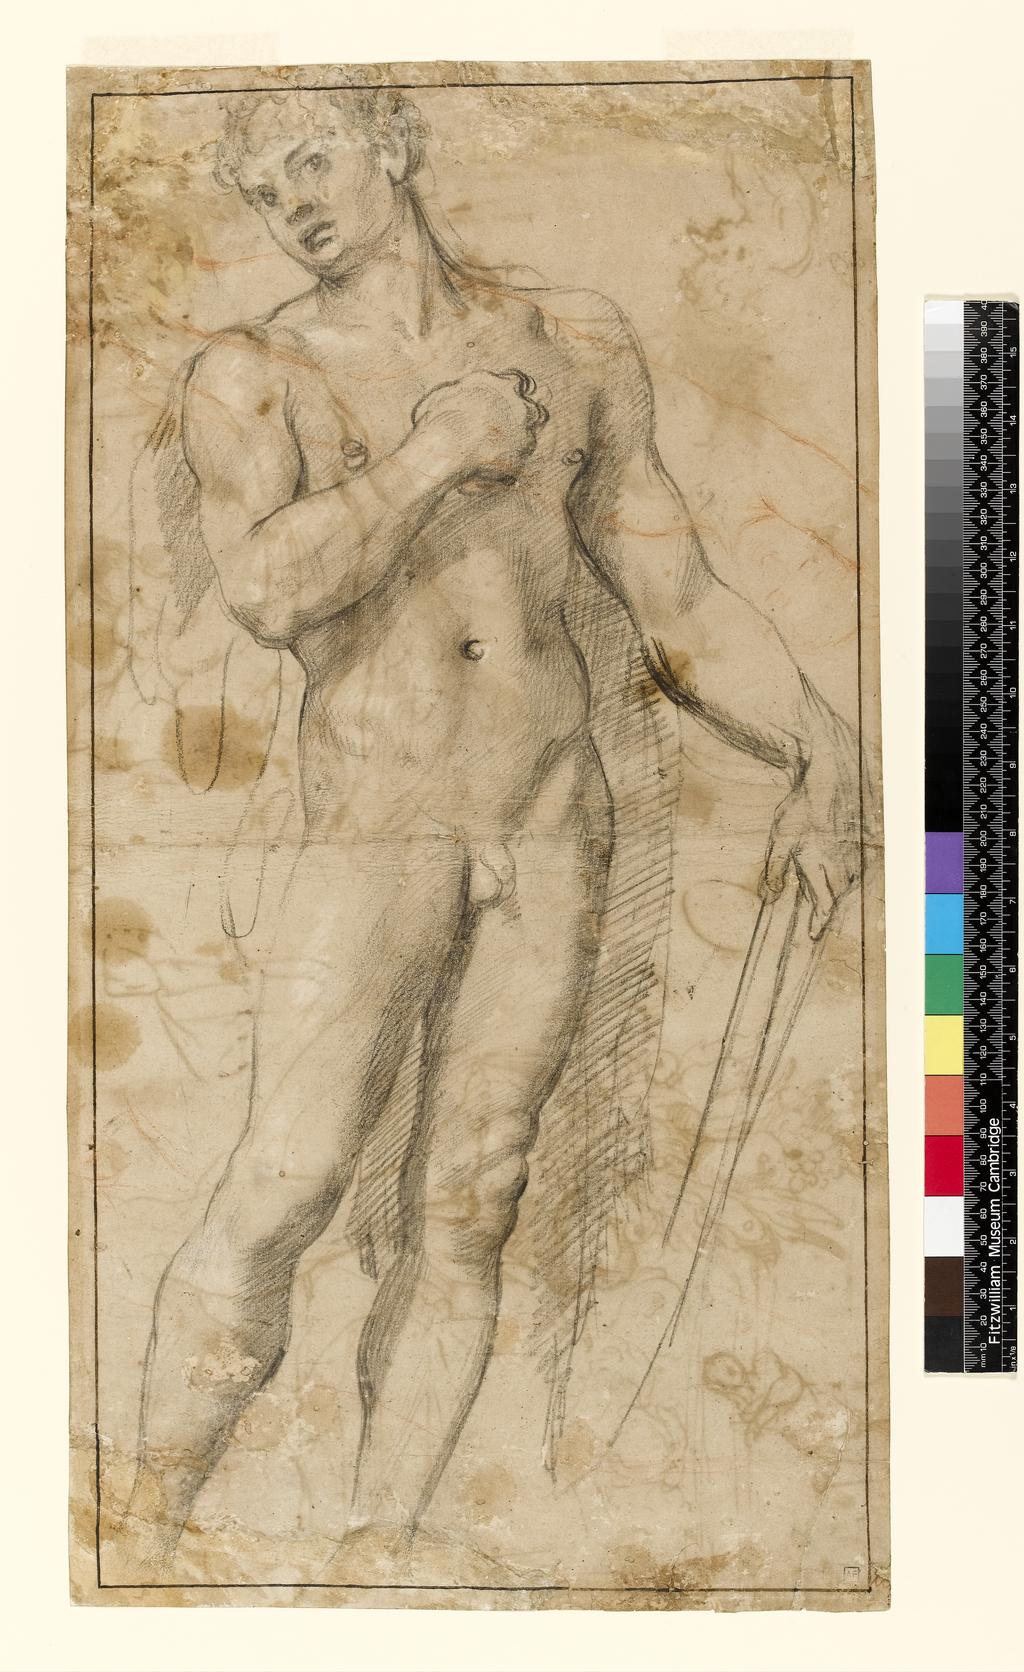 An image of Title/s: Sheet of studies: The young Hercules; Sleeping Venus (recto title)  
Maker/s: Carracci, Agostino (draughtsman) [ULAN info: Italian artist, 1557-1602]
Technique Description: recto: black and red chalks, a line of black ink acts as a border on all sides 
Dimensions: height: 578 mm, width: 307 mm

 

 
